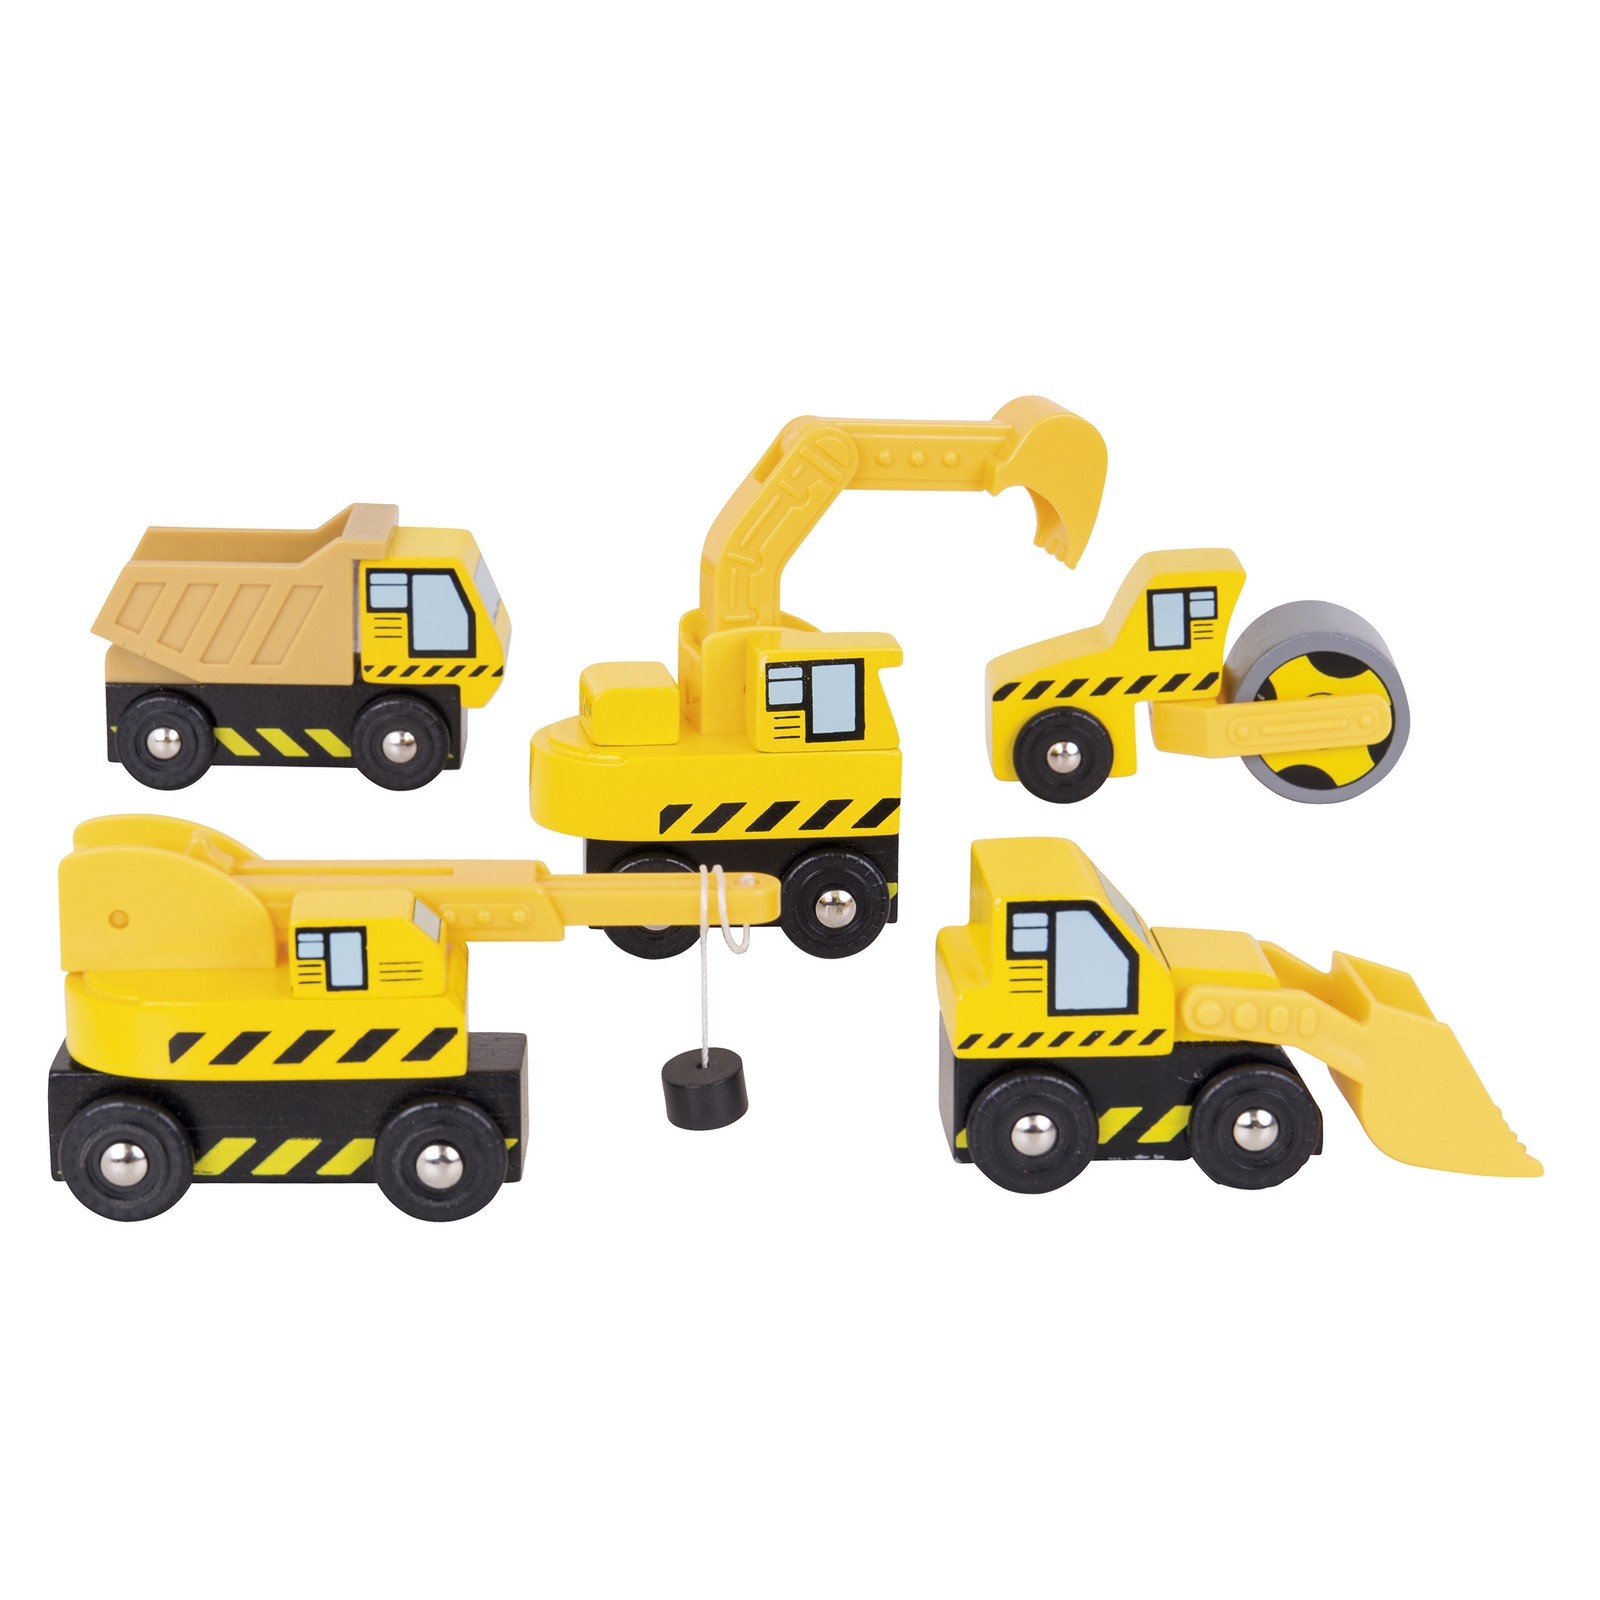 Bigjigs Toys Wooden Site Vehicles - Assorted - Pack of 5